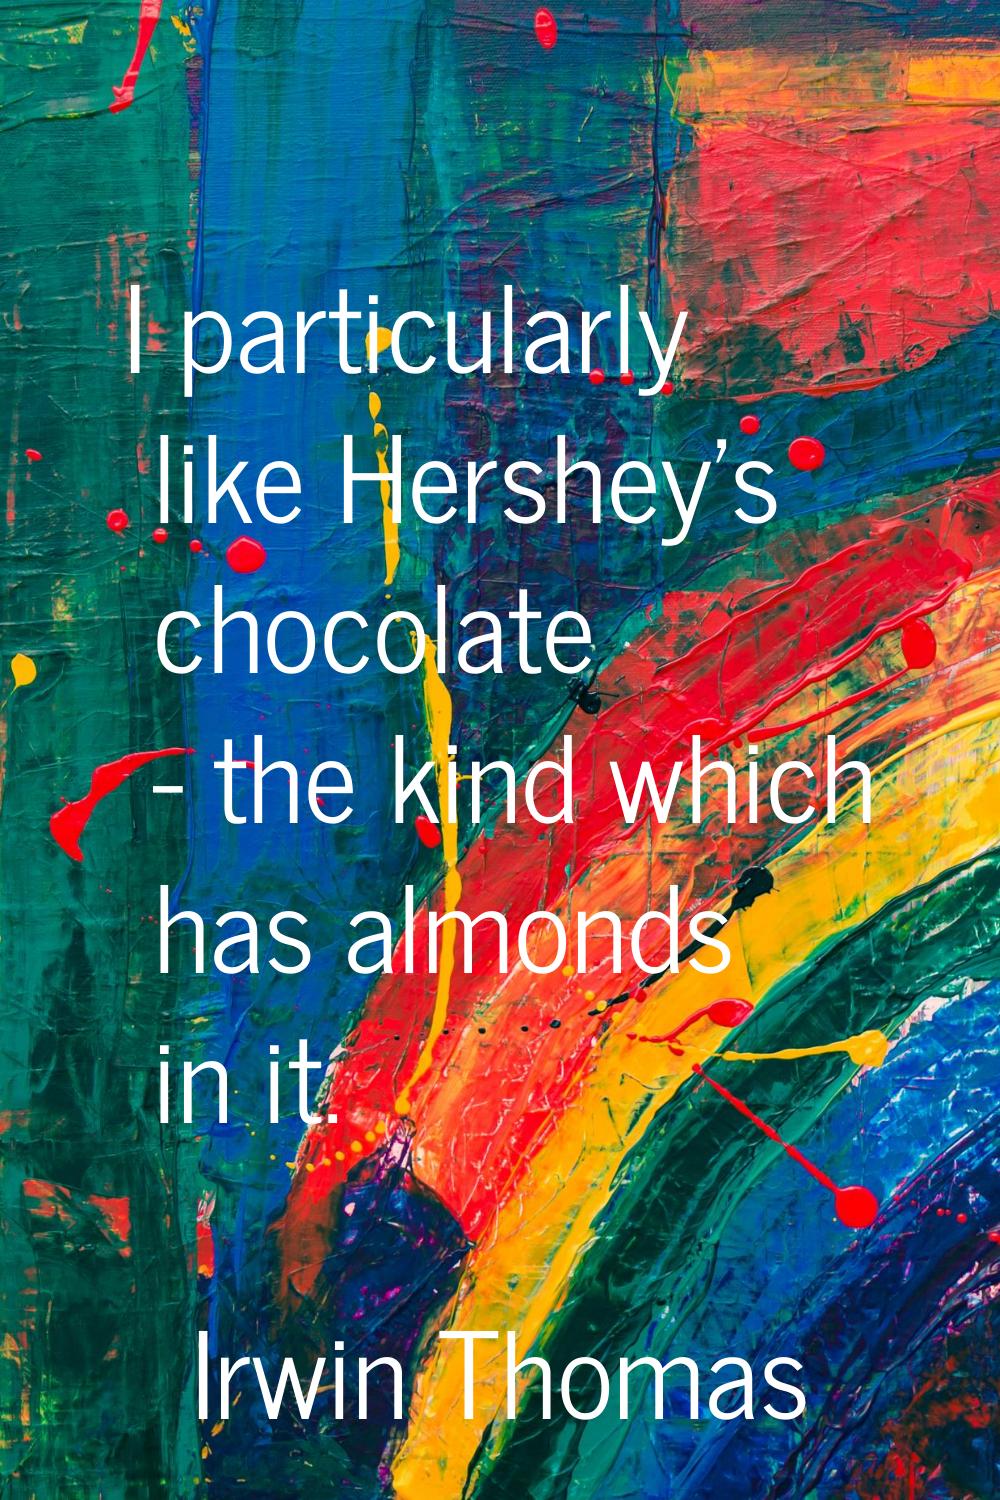 I particularly like Hershey's chocolate - the kind which has almonds in it.